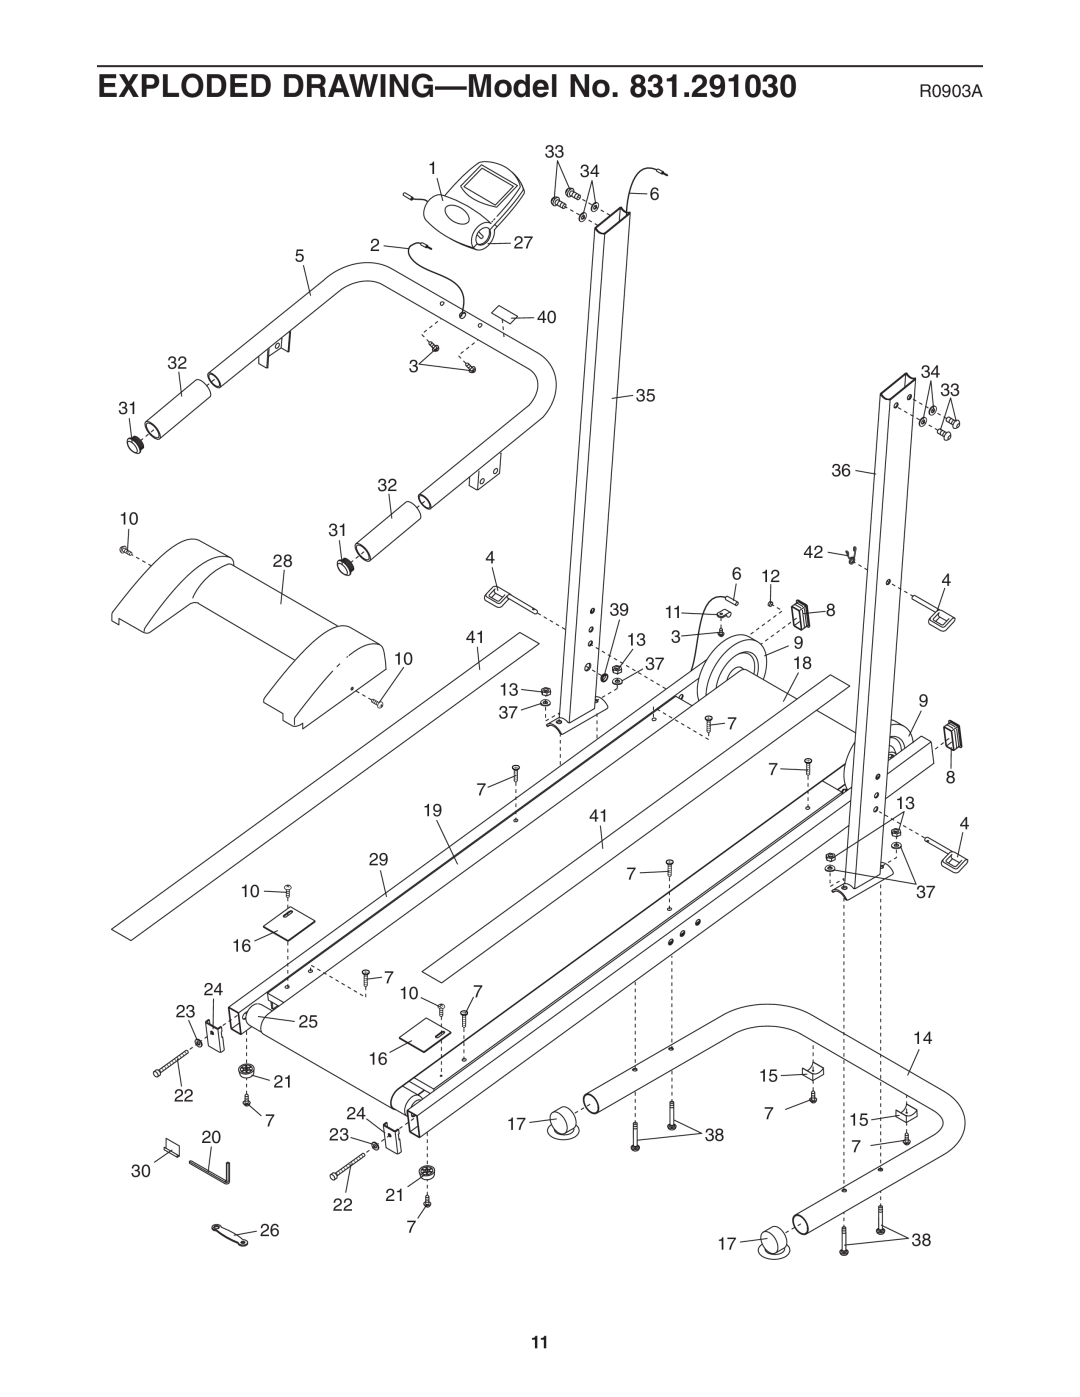 Weslo 831.291030 user manual EXPLODED DRAWING-Model No, R0903A 